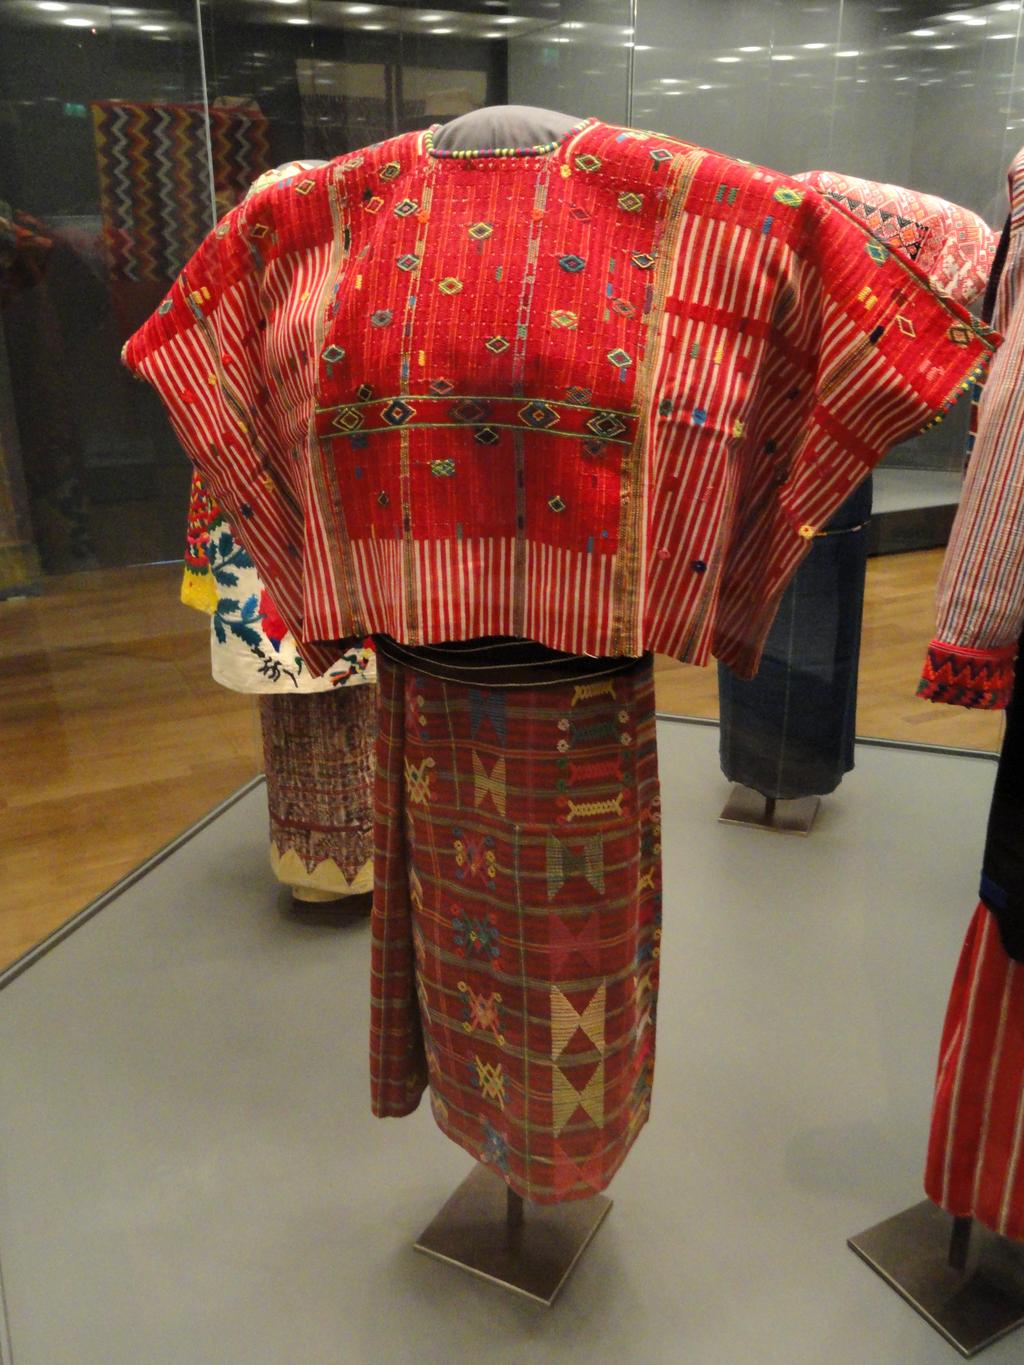 Mayan Clothing The Maya wove beautiful fabrics using cotton, hemp, and other fibers. Fibers were dyed and then woven into brilliant designs.